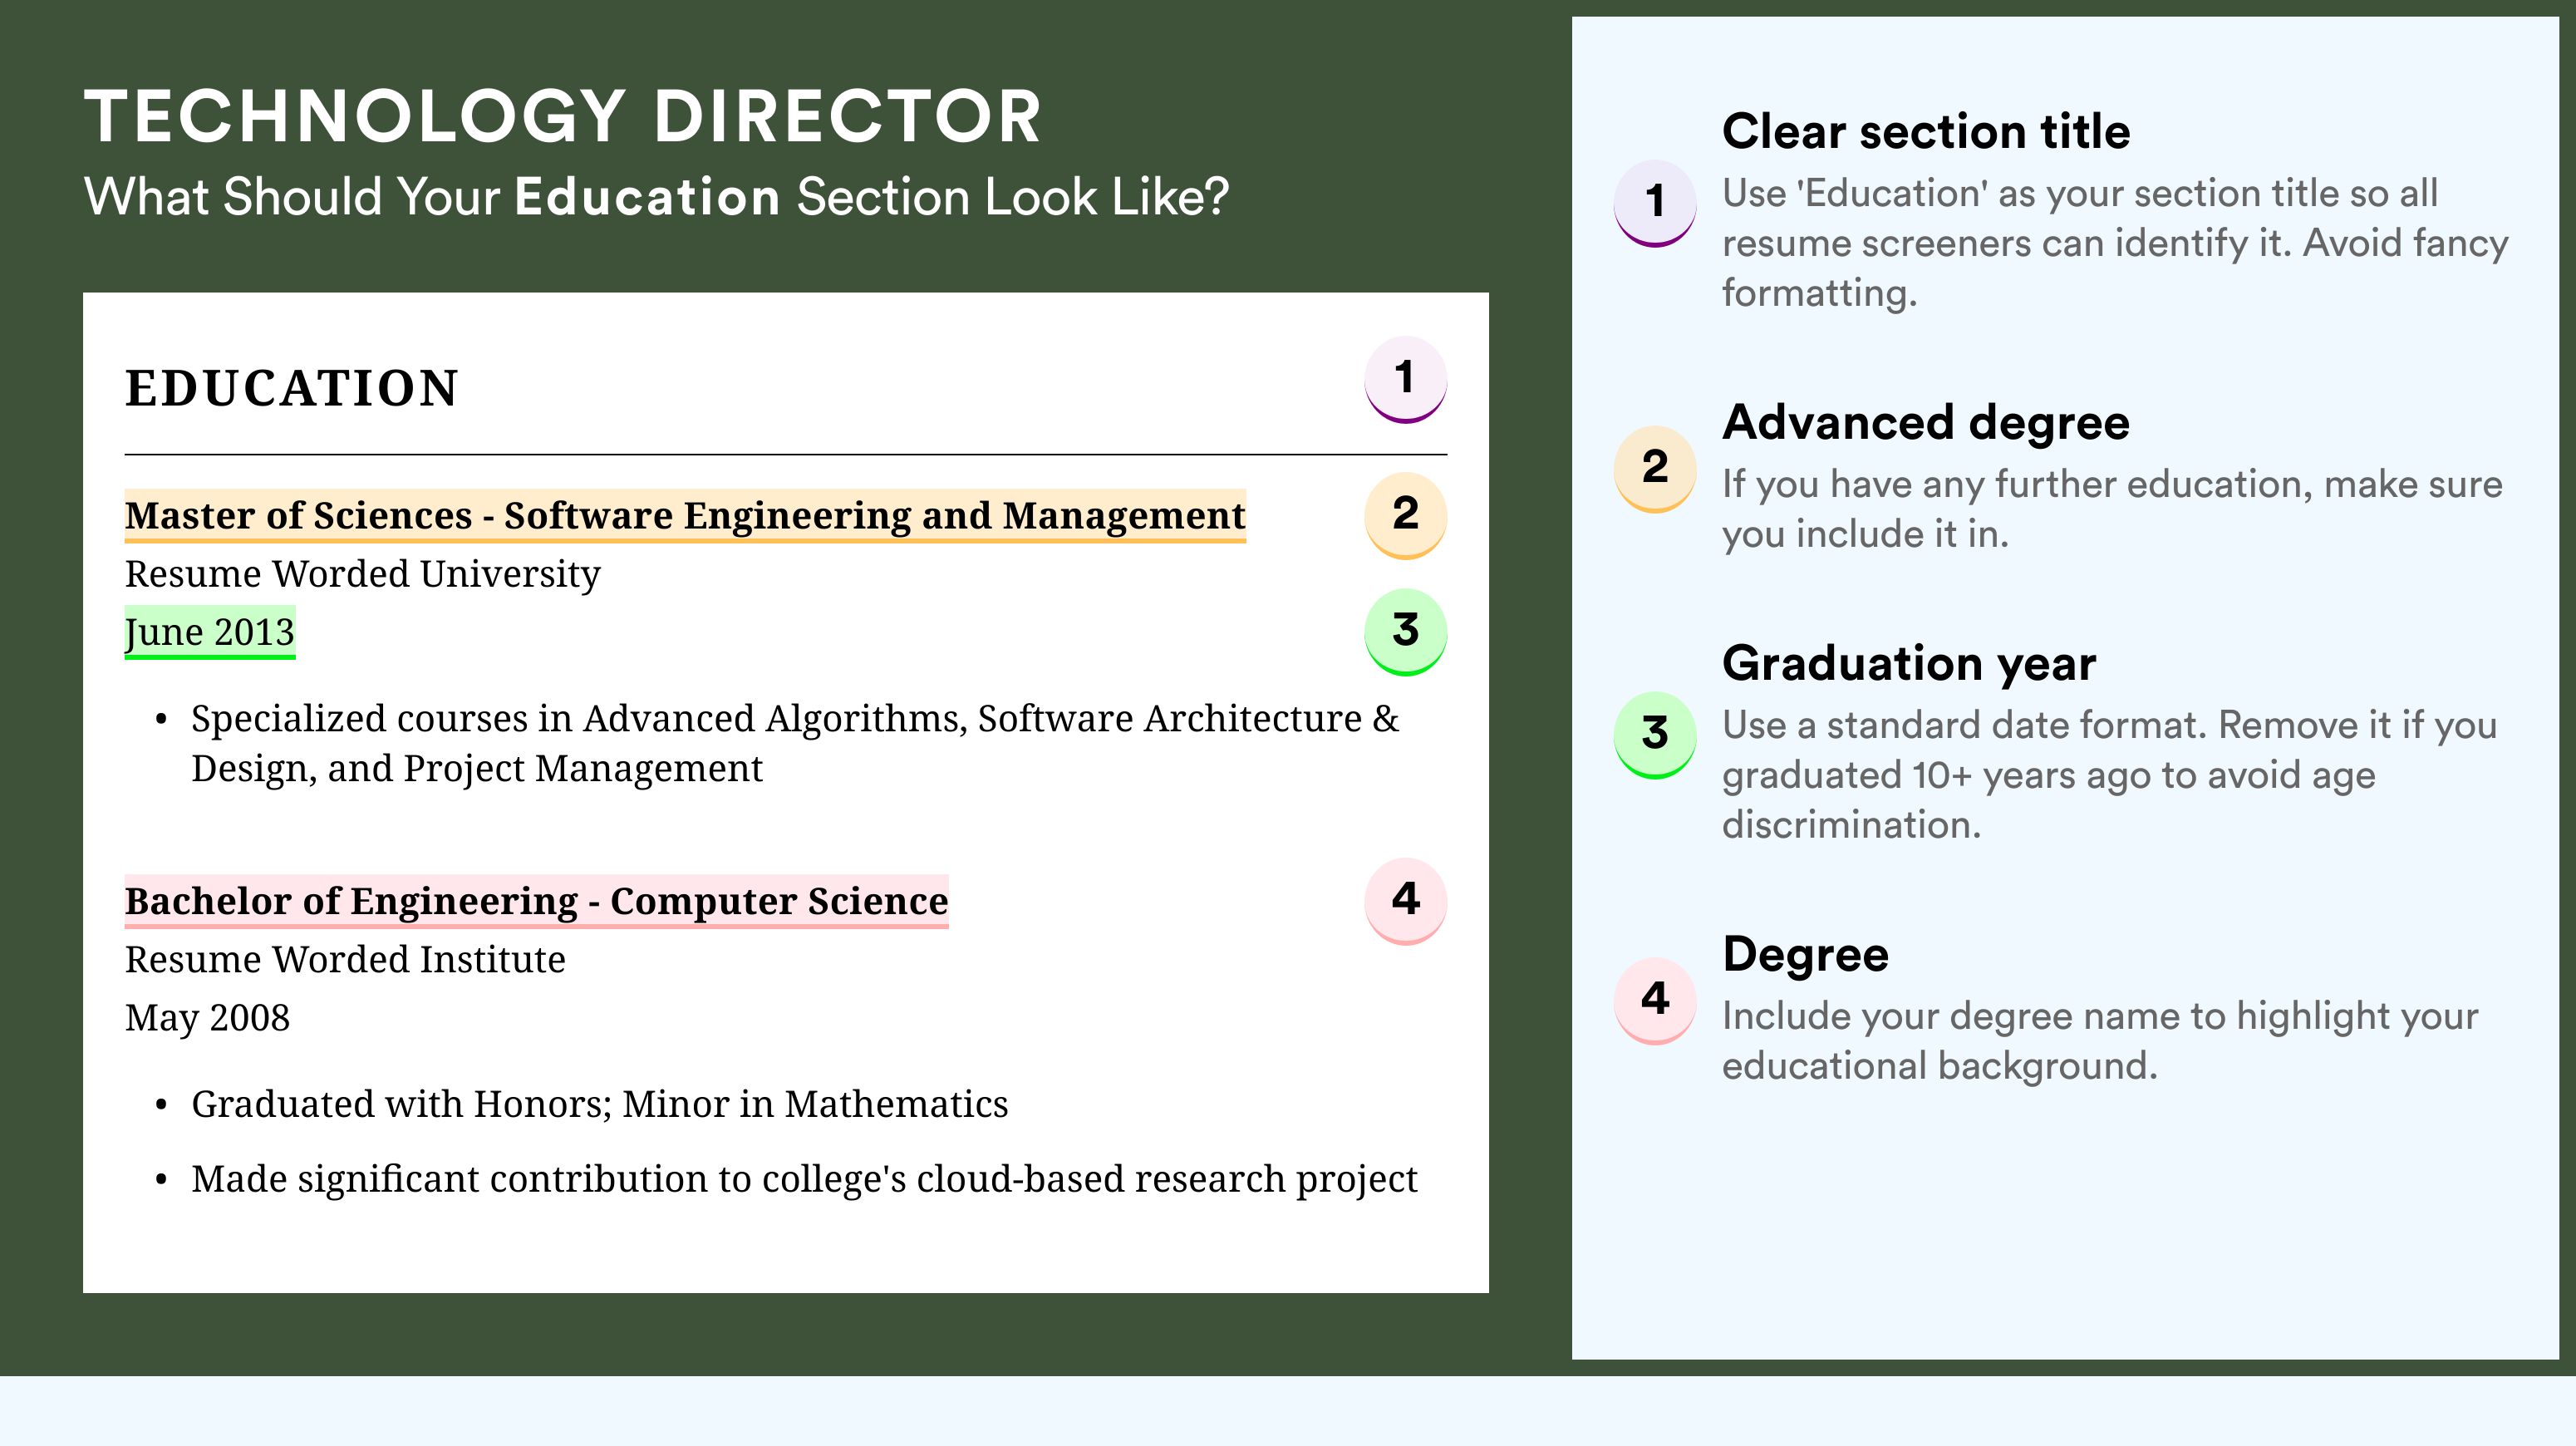 How To Write An Education Section - Technology Director Roles